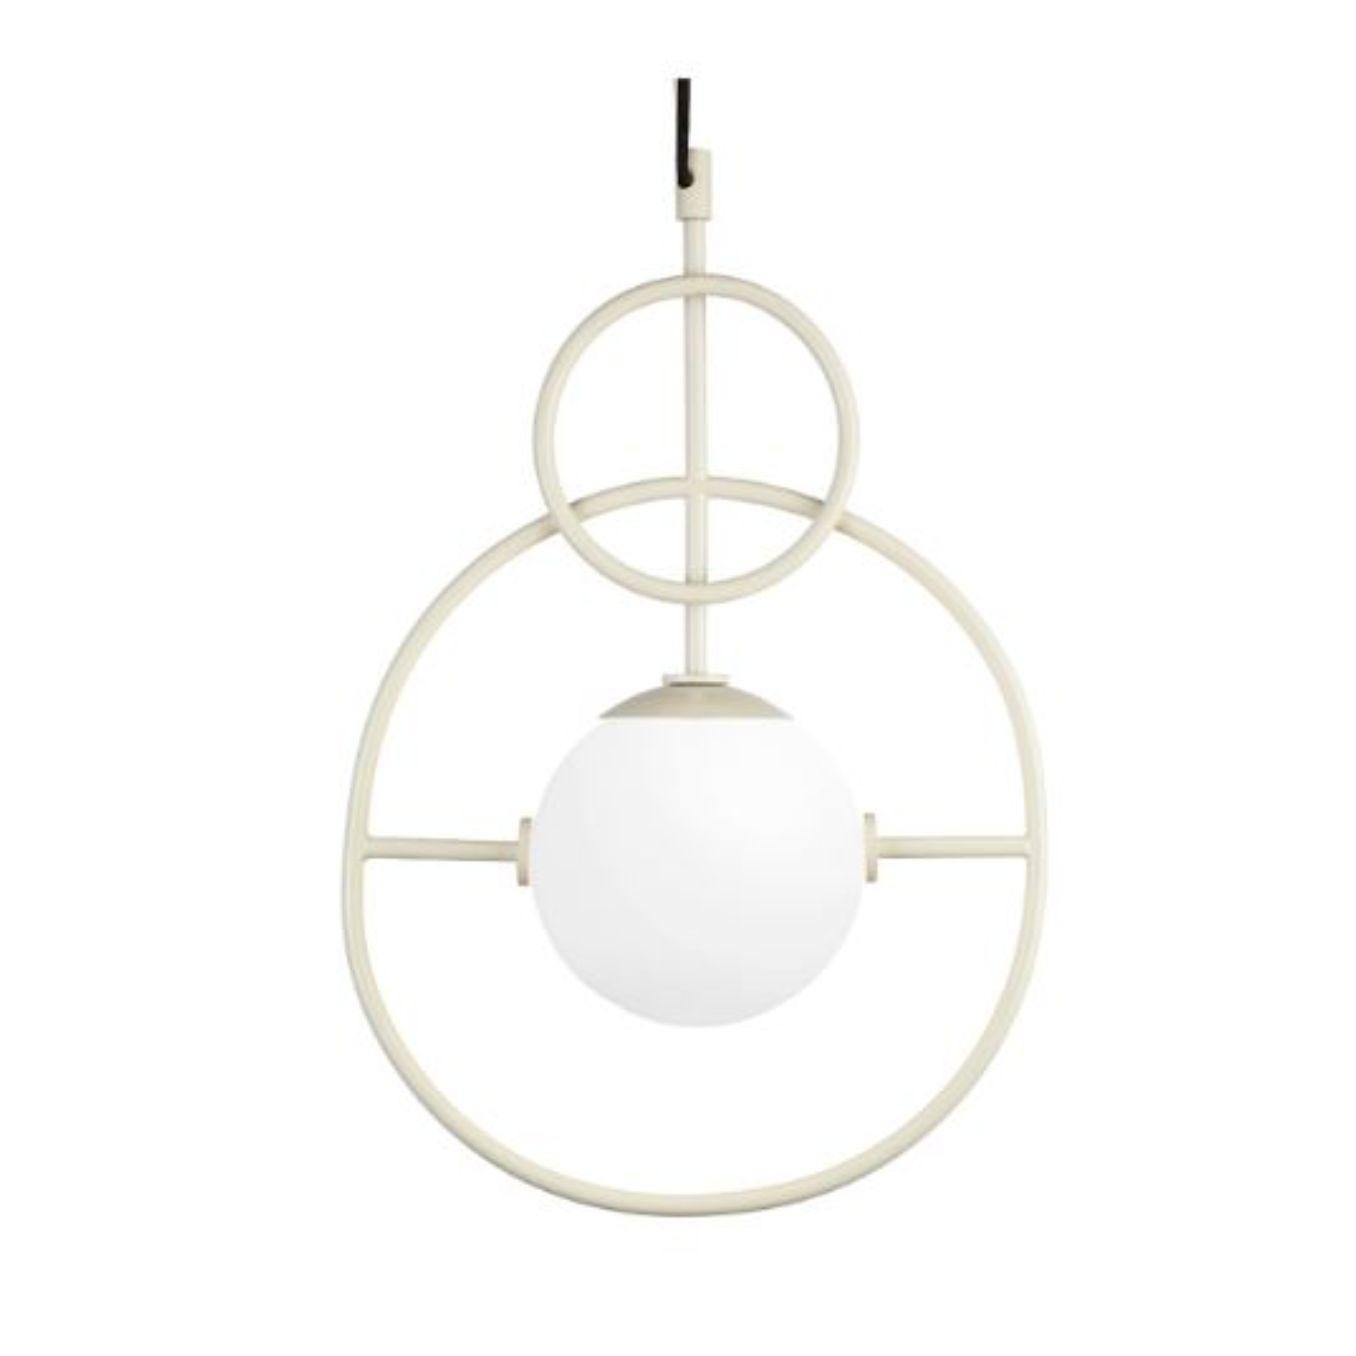 Ivory loop II suspension lamp by Dooq.
Dimensions: W 31 x D 15 x H 47 cm.
Materials: lacquered metal, polished or brushed metal.
Also available in different colours and materials.

Information:
230V/50Hz
1 x max. G9
4W LED

120V/60Hz
1 x max. G9
4W